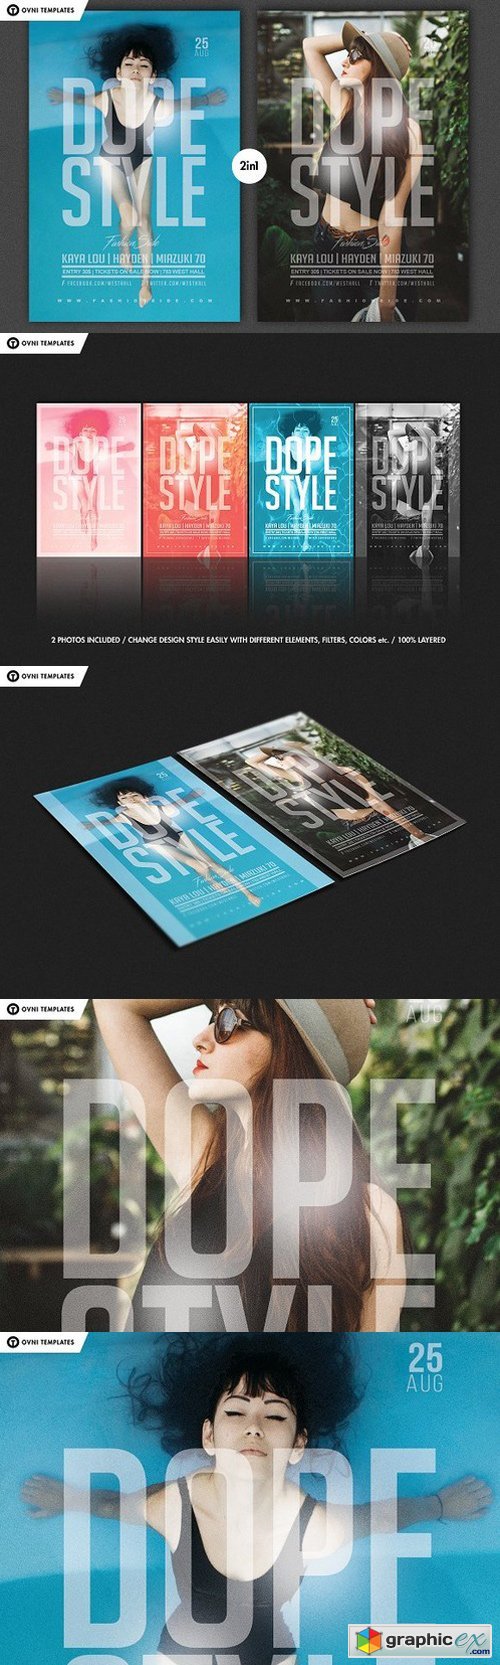 DOPE STYLE Flyer Template